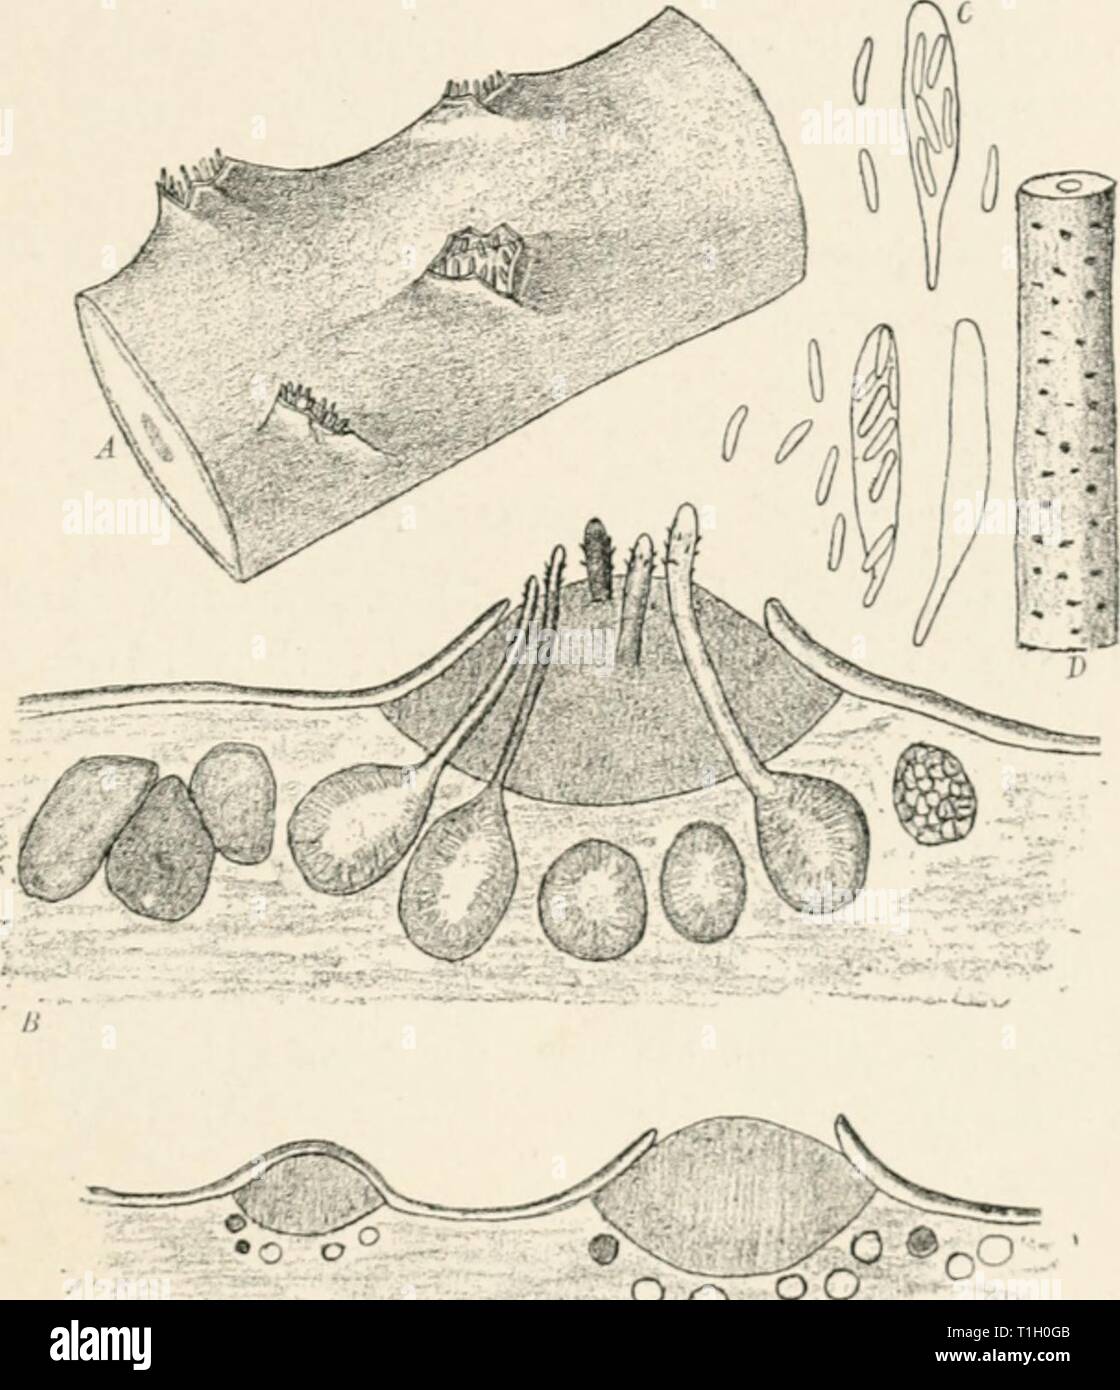 Diseases of plants induced by Diseases of plants induced by cryptogamuc parasites; introduction to the study of pathogenic fungi, slime-fungi, bacteria, and algae. English ed. by William G. Smith  diseasesofplants00tubeuoft Year: 1897  VALSA. 225 where leaves of the alder are dried in sumnier for use as winter-fodder for goats. In the branches attacked, a mycelium is developed in the vessels of the wood, whereby the supply of water is stopped and the bark dries up. Black lens-shaped stromata arise under the epidermis of the twig and rui)ture it. The peritliecia are produced under the stromata  Stock Photo